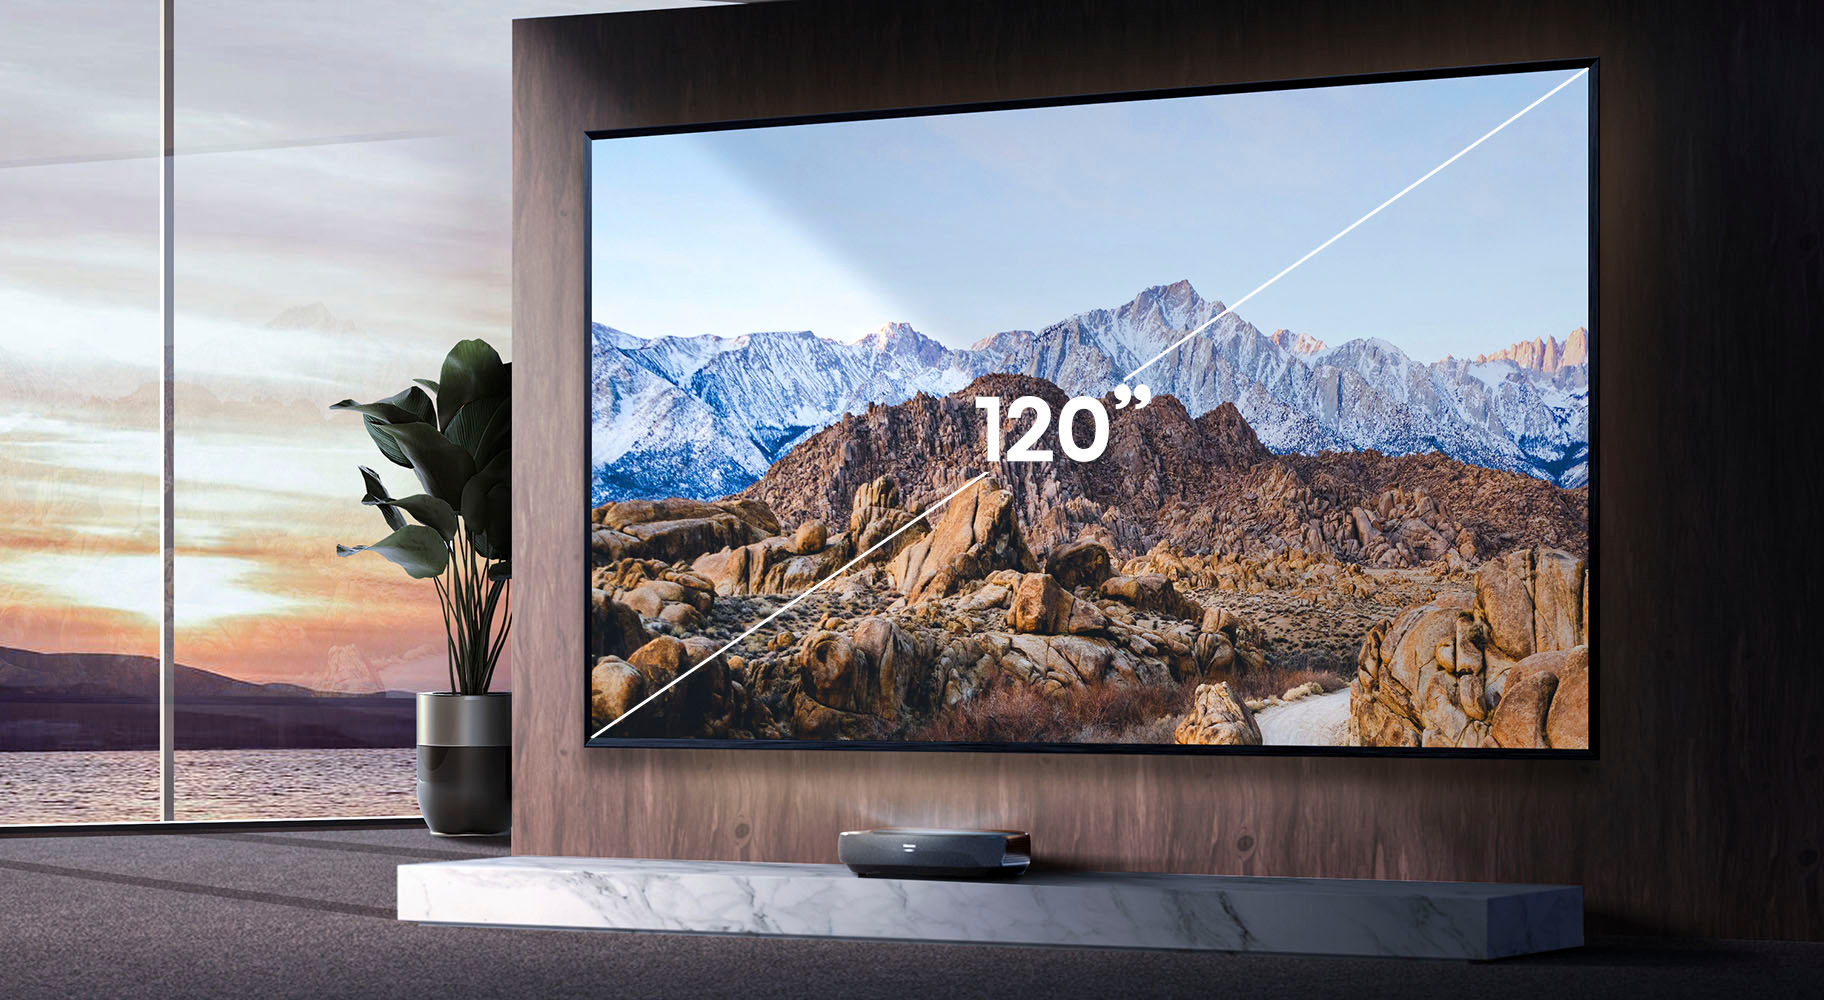 Hisense Reveals 100-Inch TV for $3,000, Just in Time for the Big